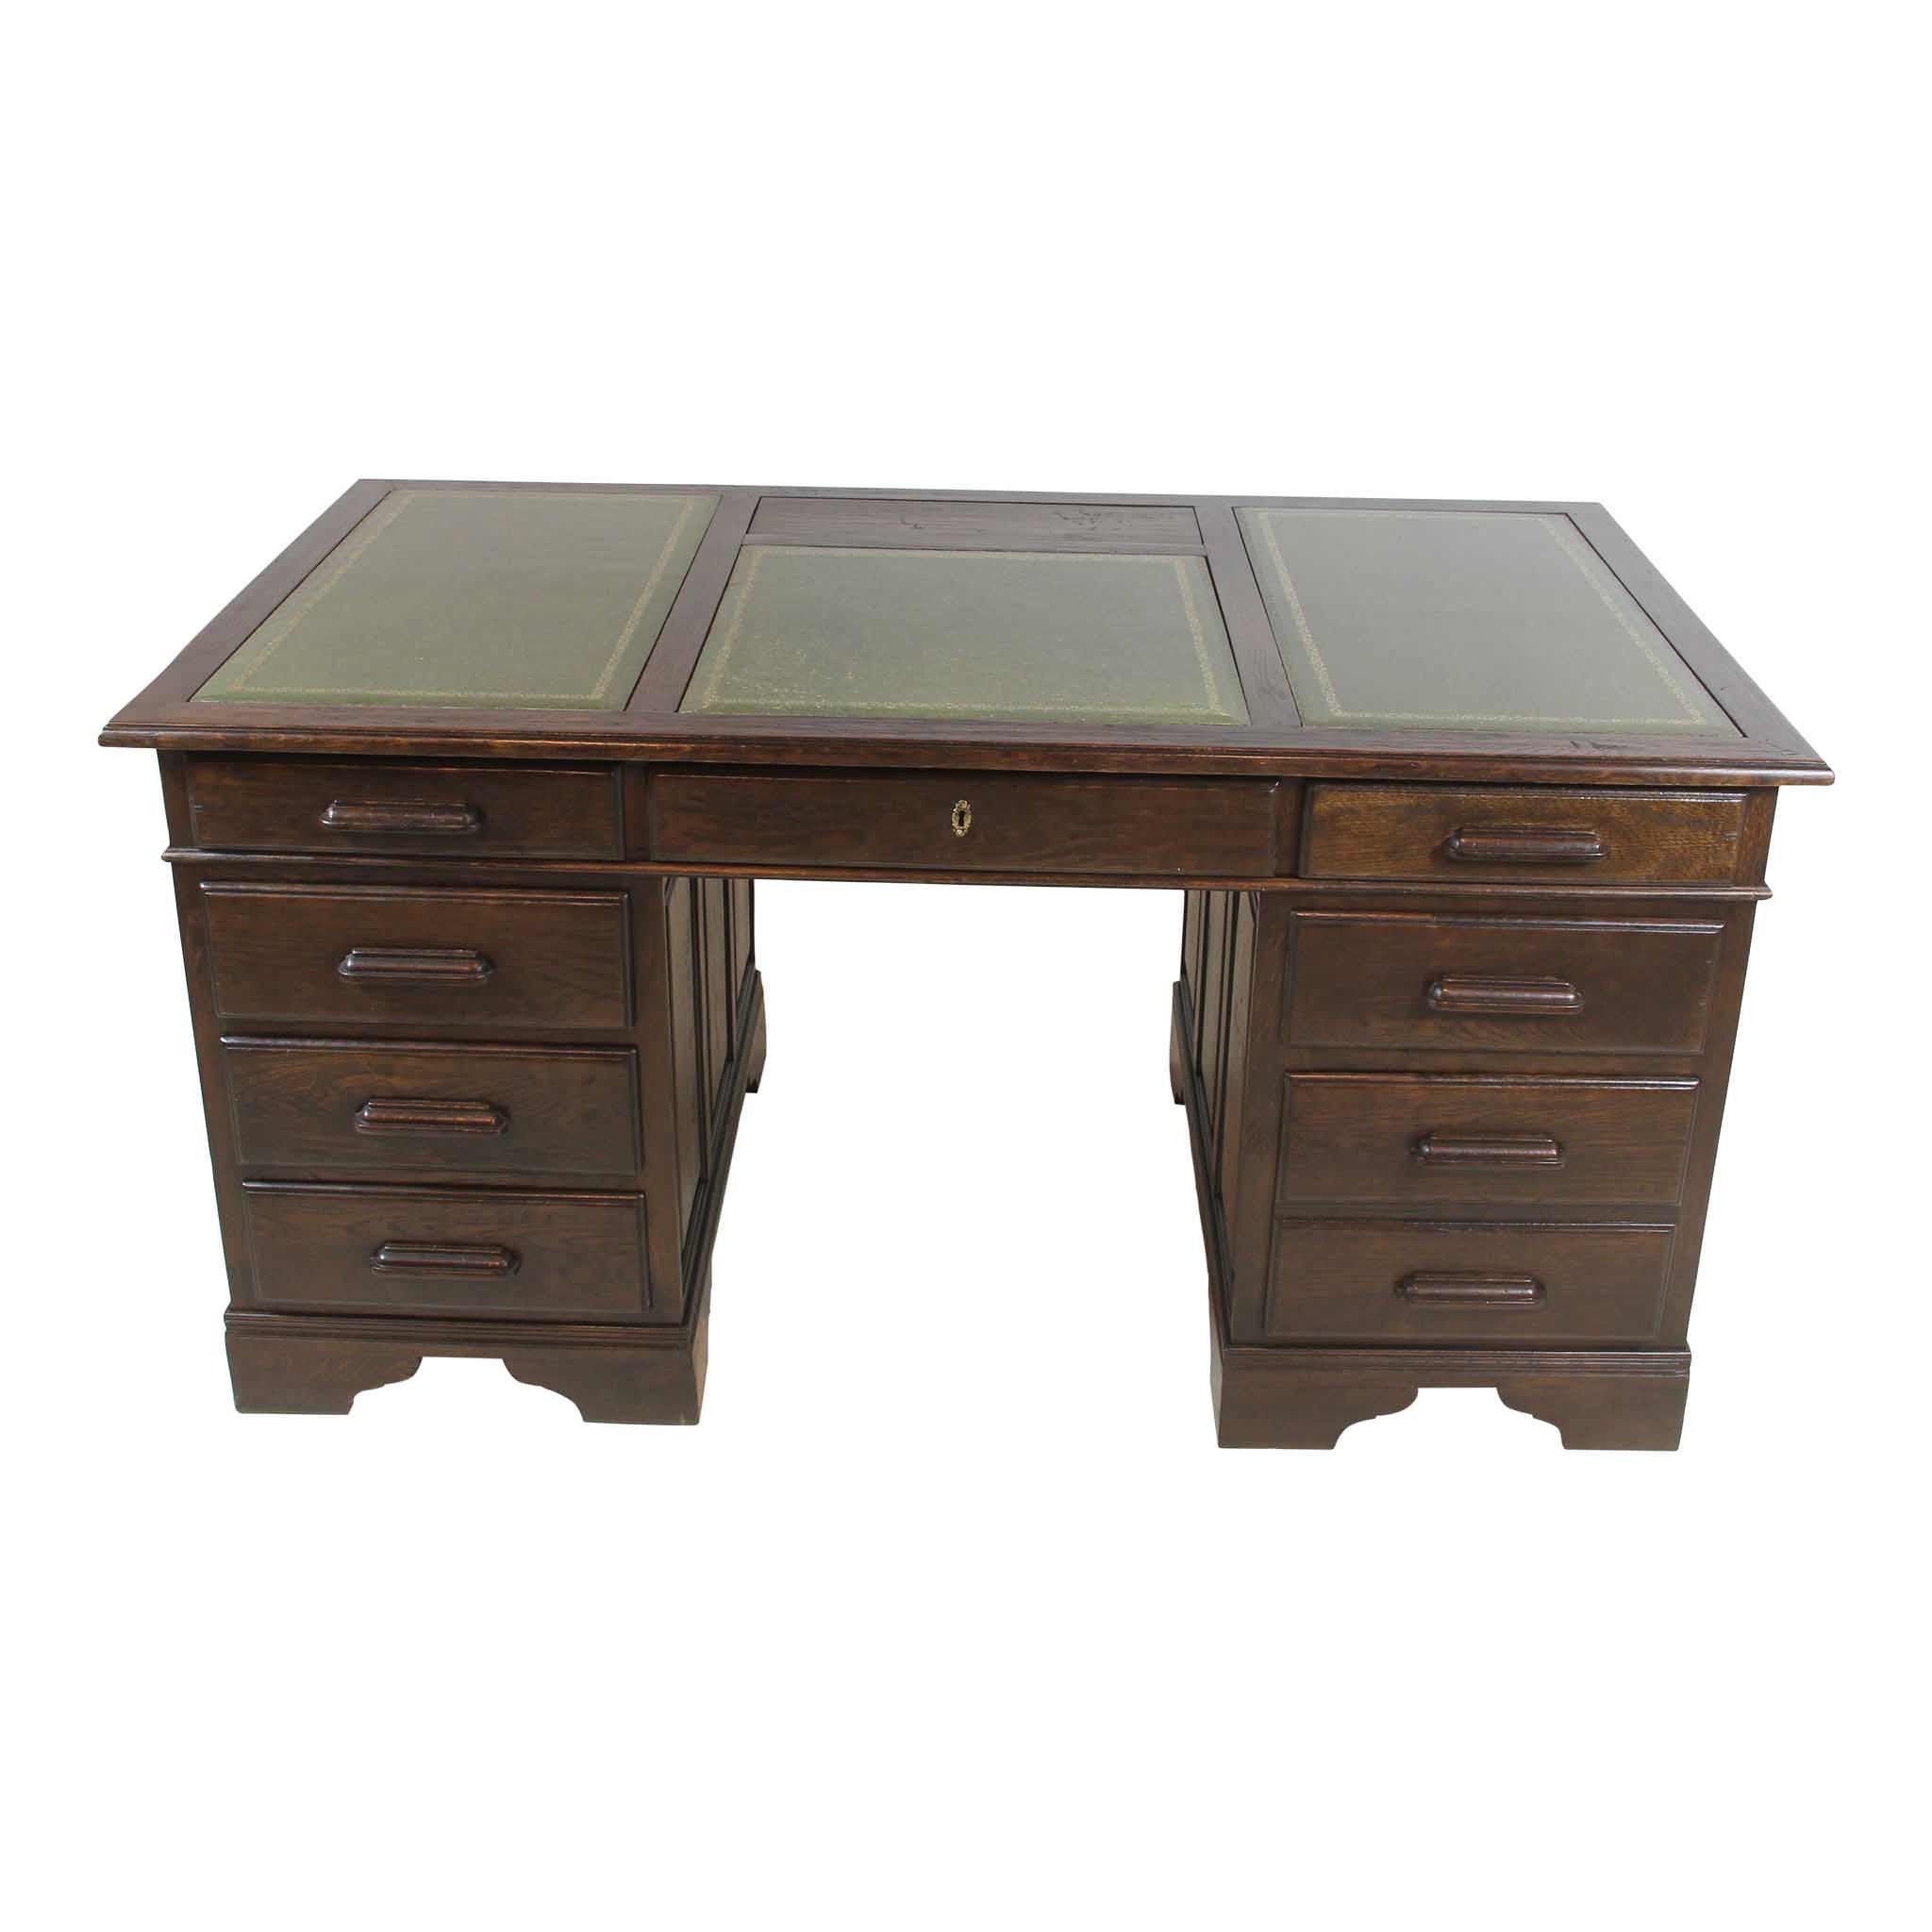 English Desk with Leather Top